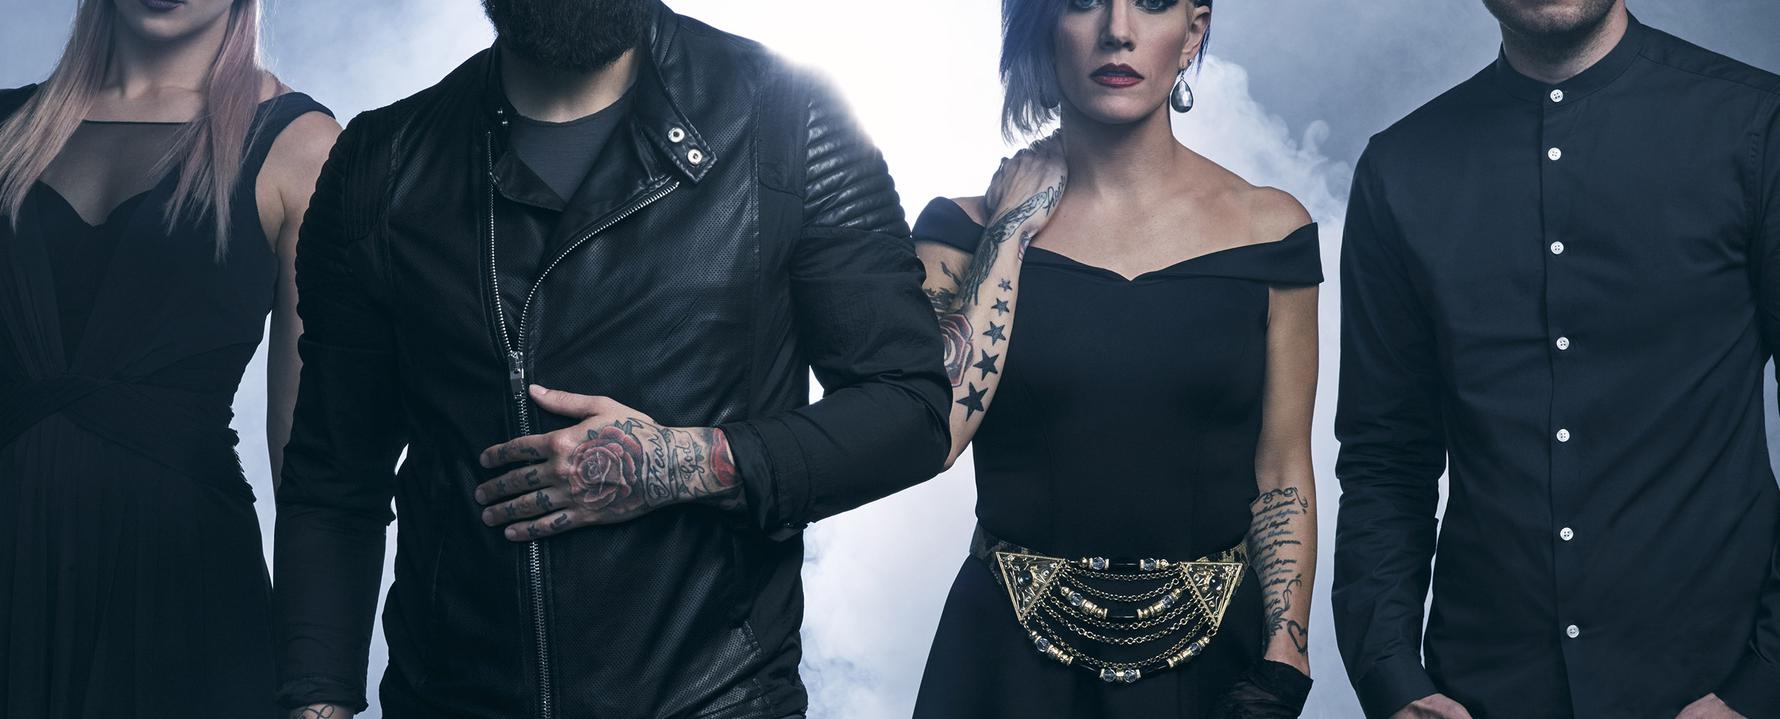 Promotional photograph of Skillet.